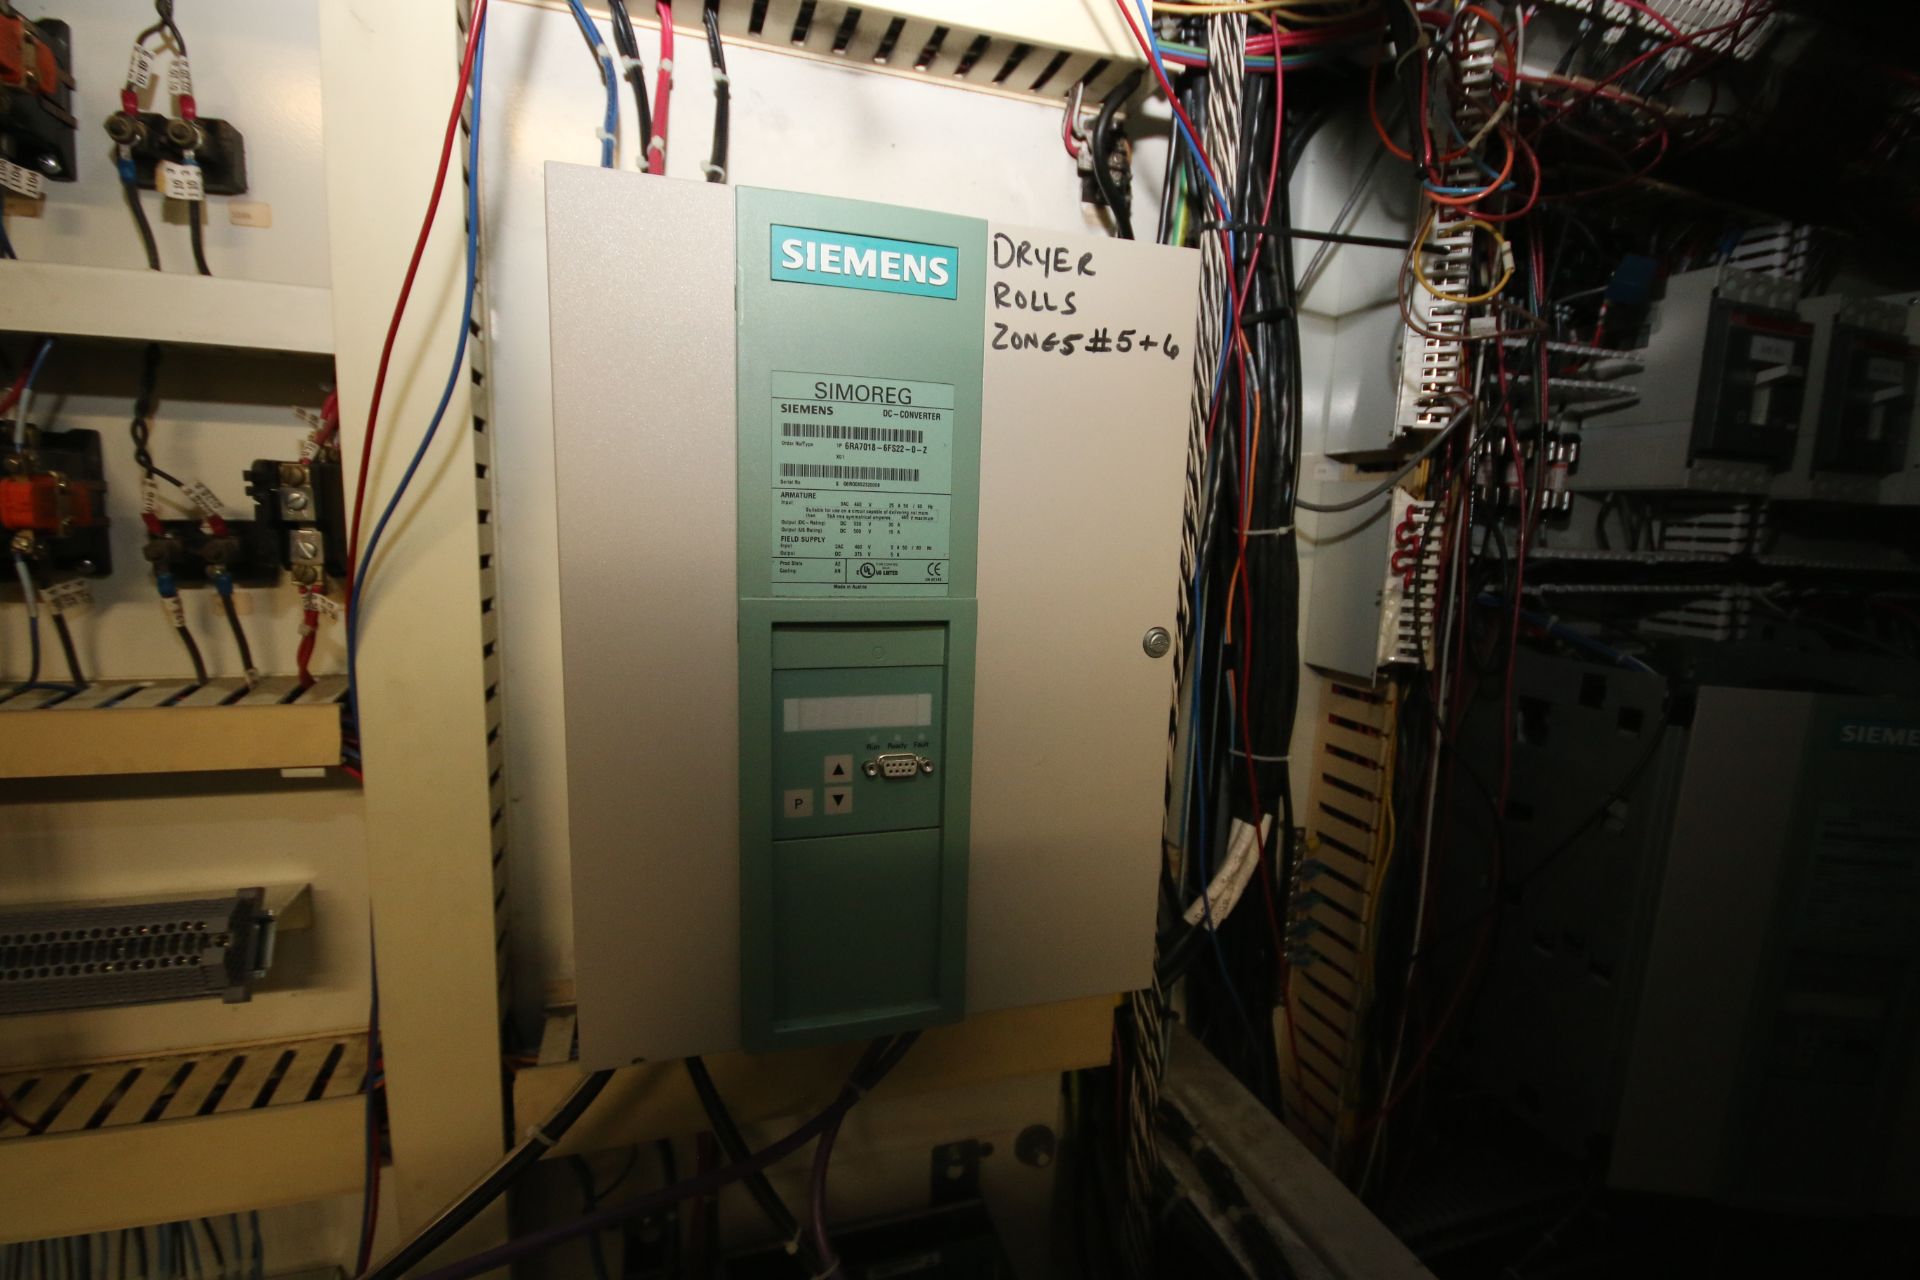 (2) Dryer Control Panels for Dryer Rolls Zones 1 to 8 with Electro Flyte (4) Siemens DC/ - Image 5 of 9